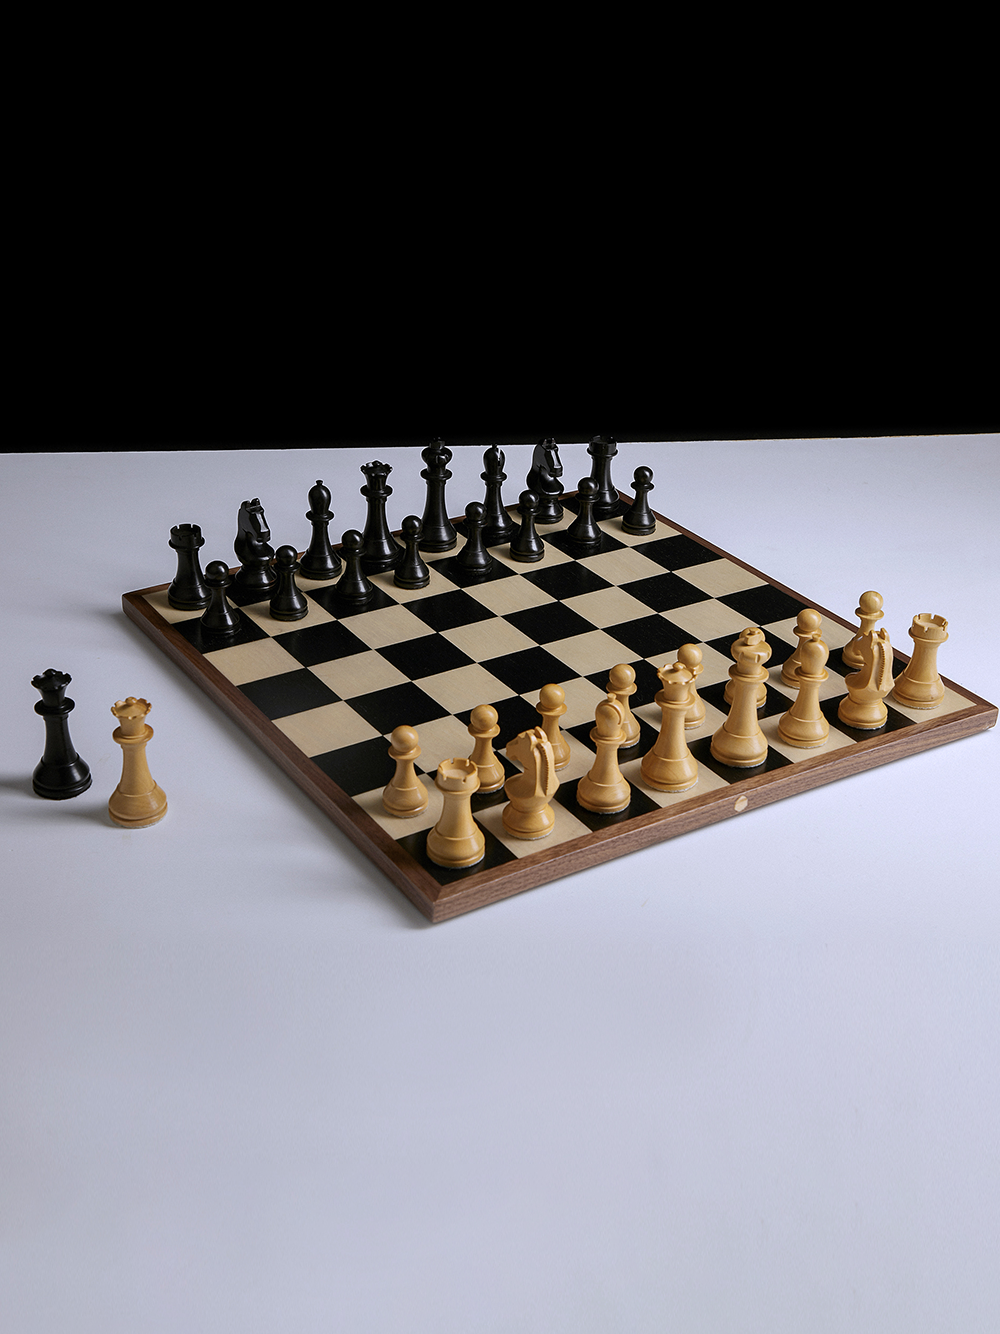 Chess Sets at Official Staunton UK Online Store